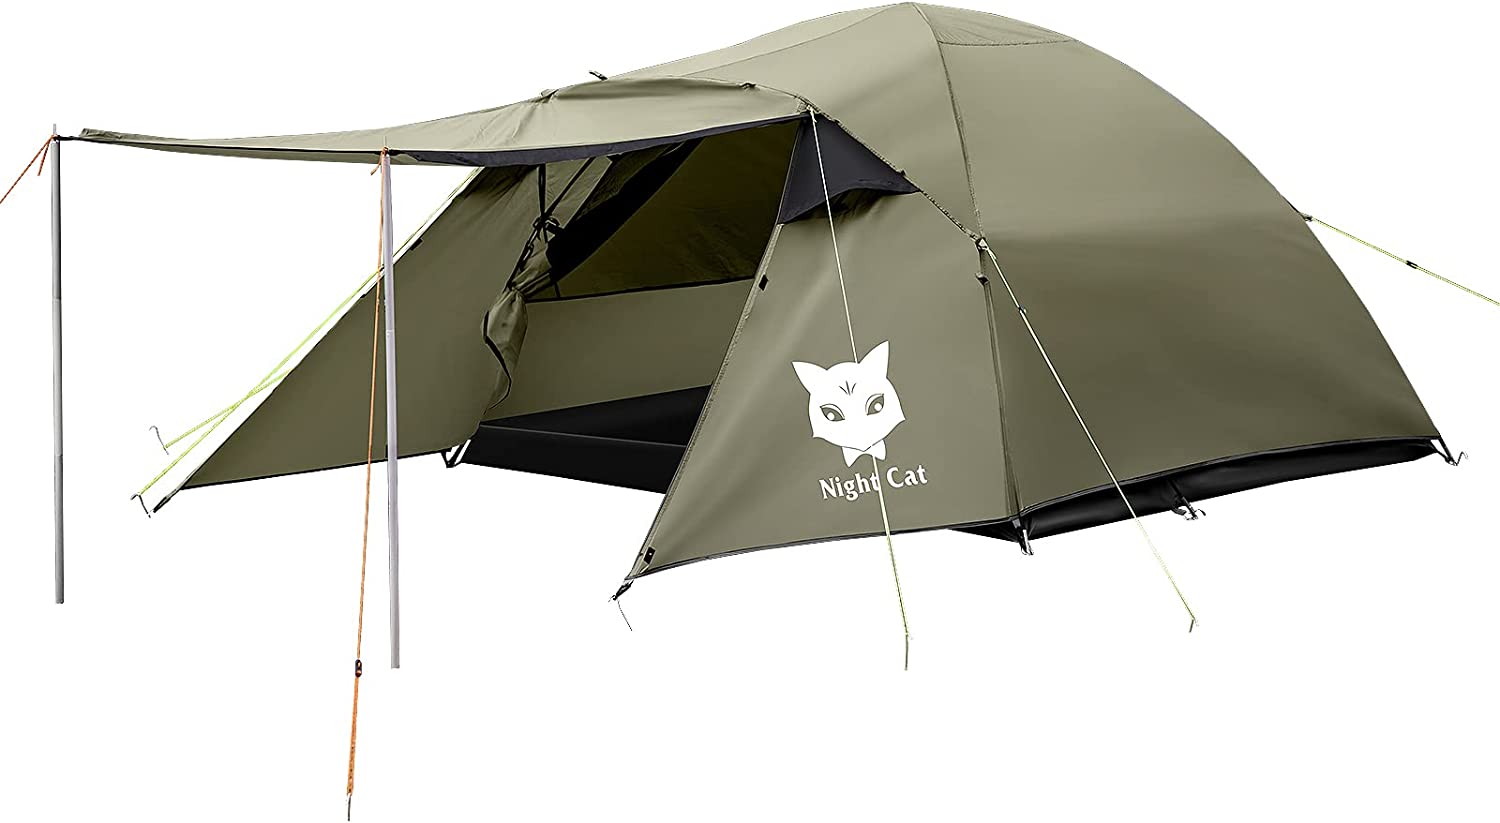 Night Cat Camping Tent with Collapsible Trekking Pole Family Backpacking Tent with Porch with Double Layers Waterproof